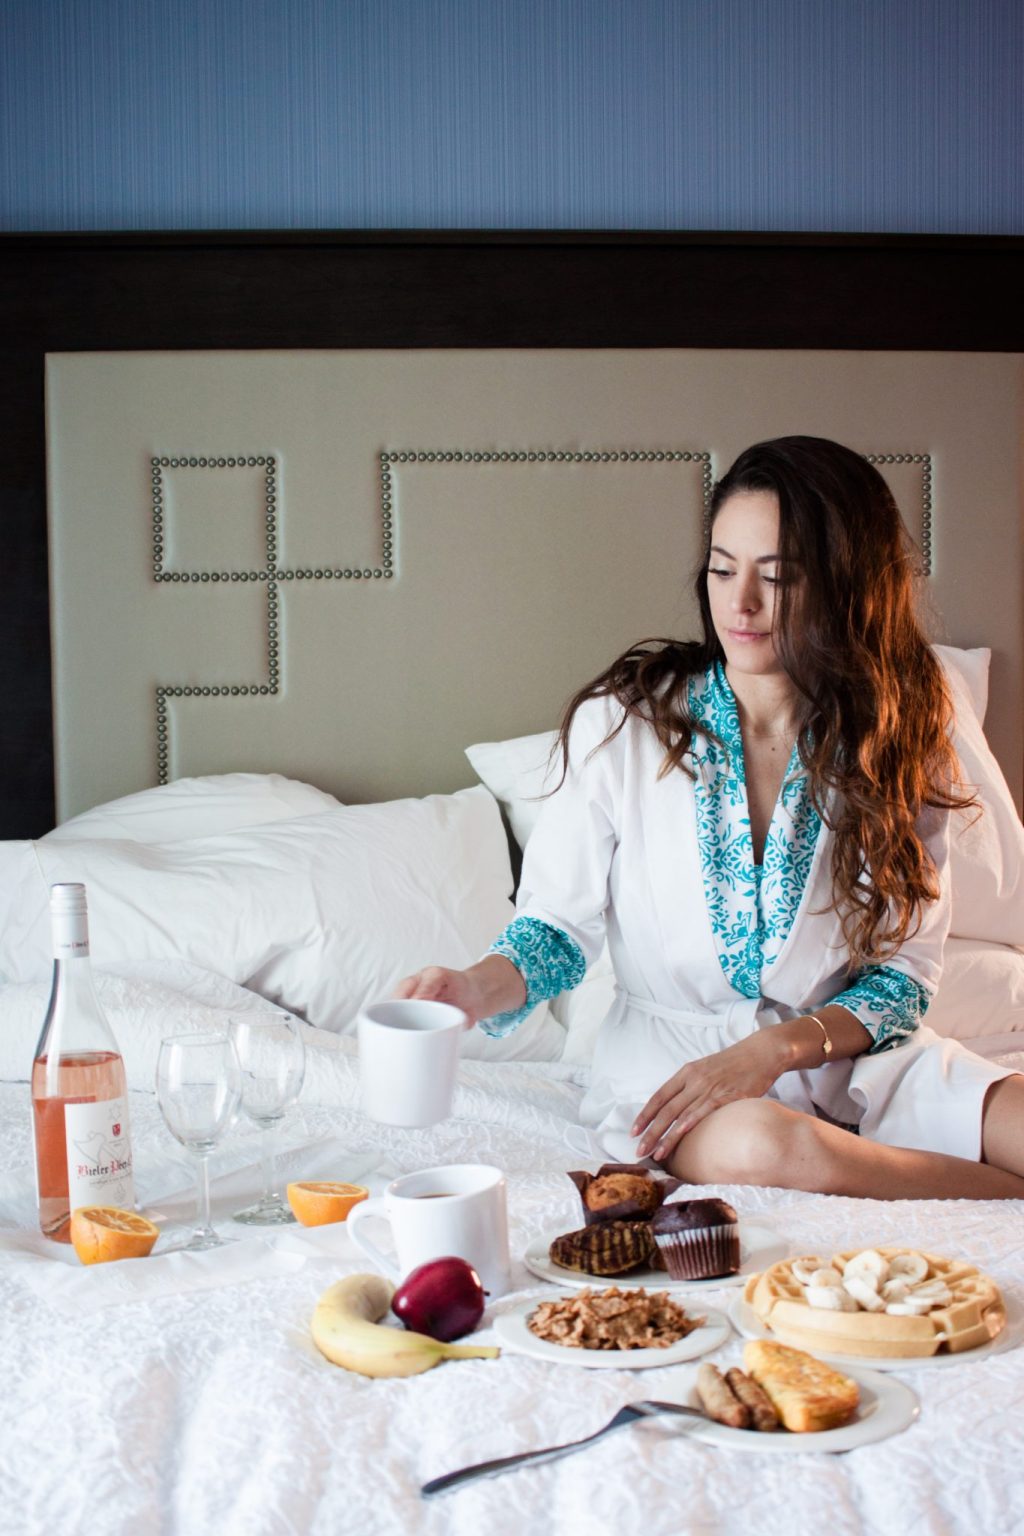 rosé all day, rose all day, breakfast in bed, napa valley, where to stay in napa valley, hampton inn and suites napa valley, project love, best friends